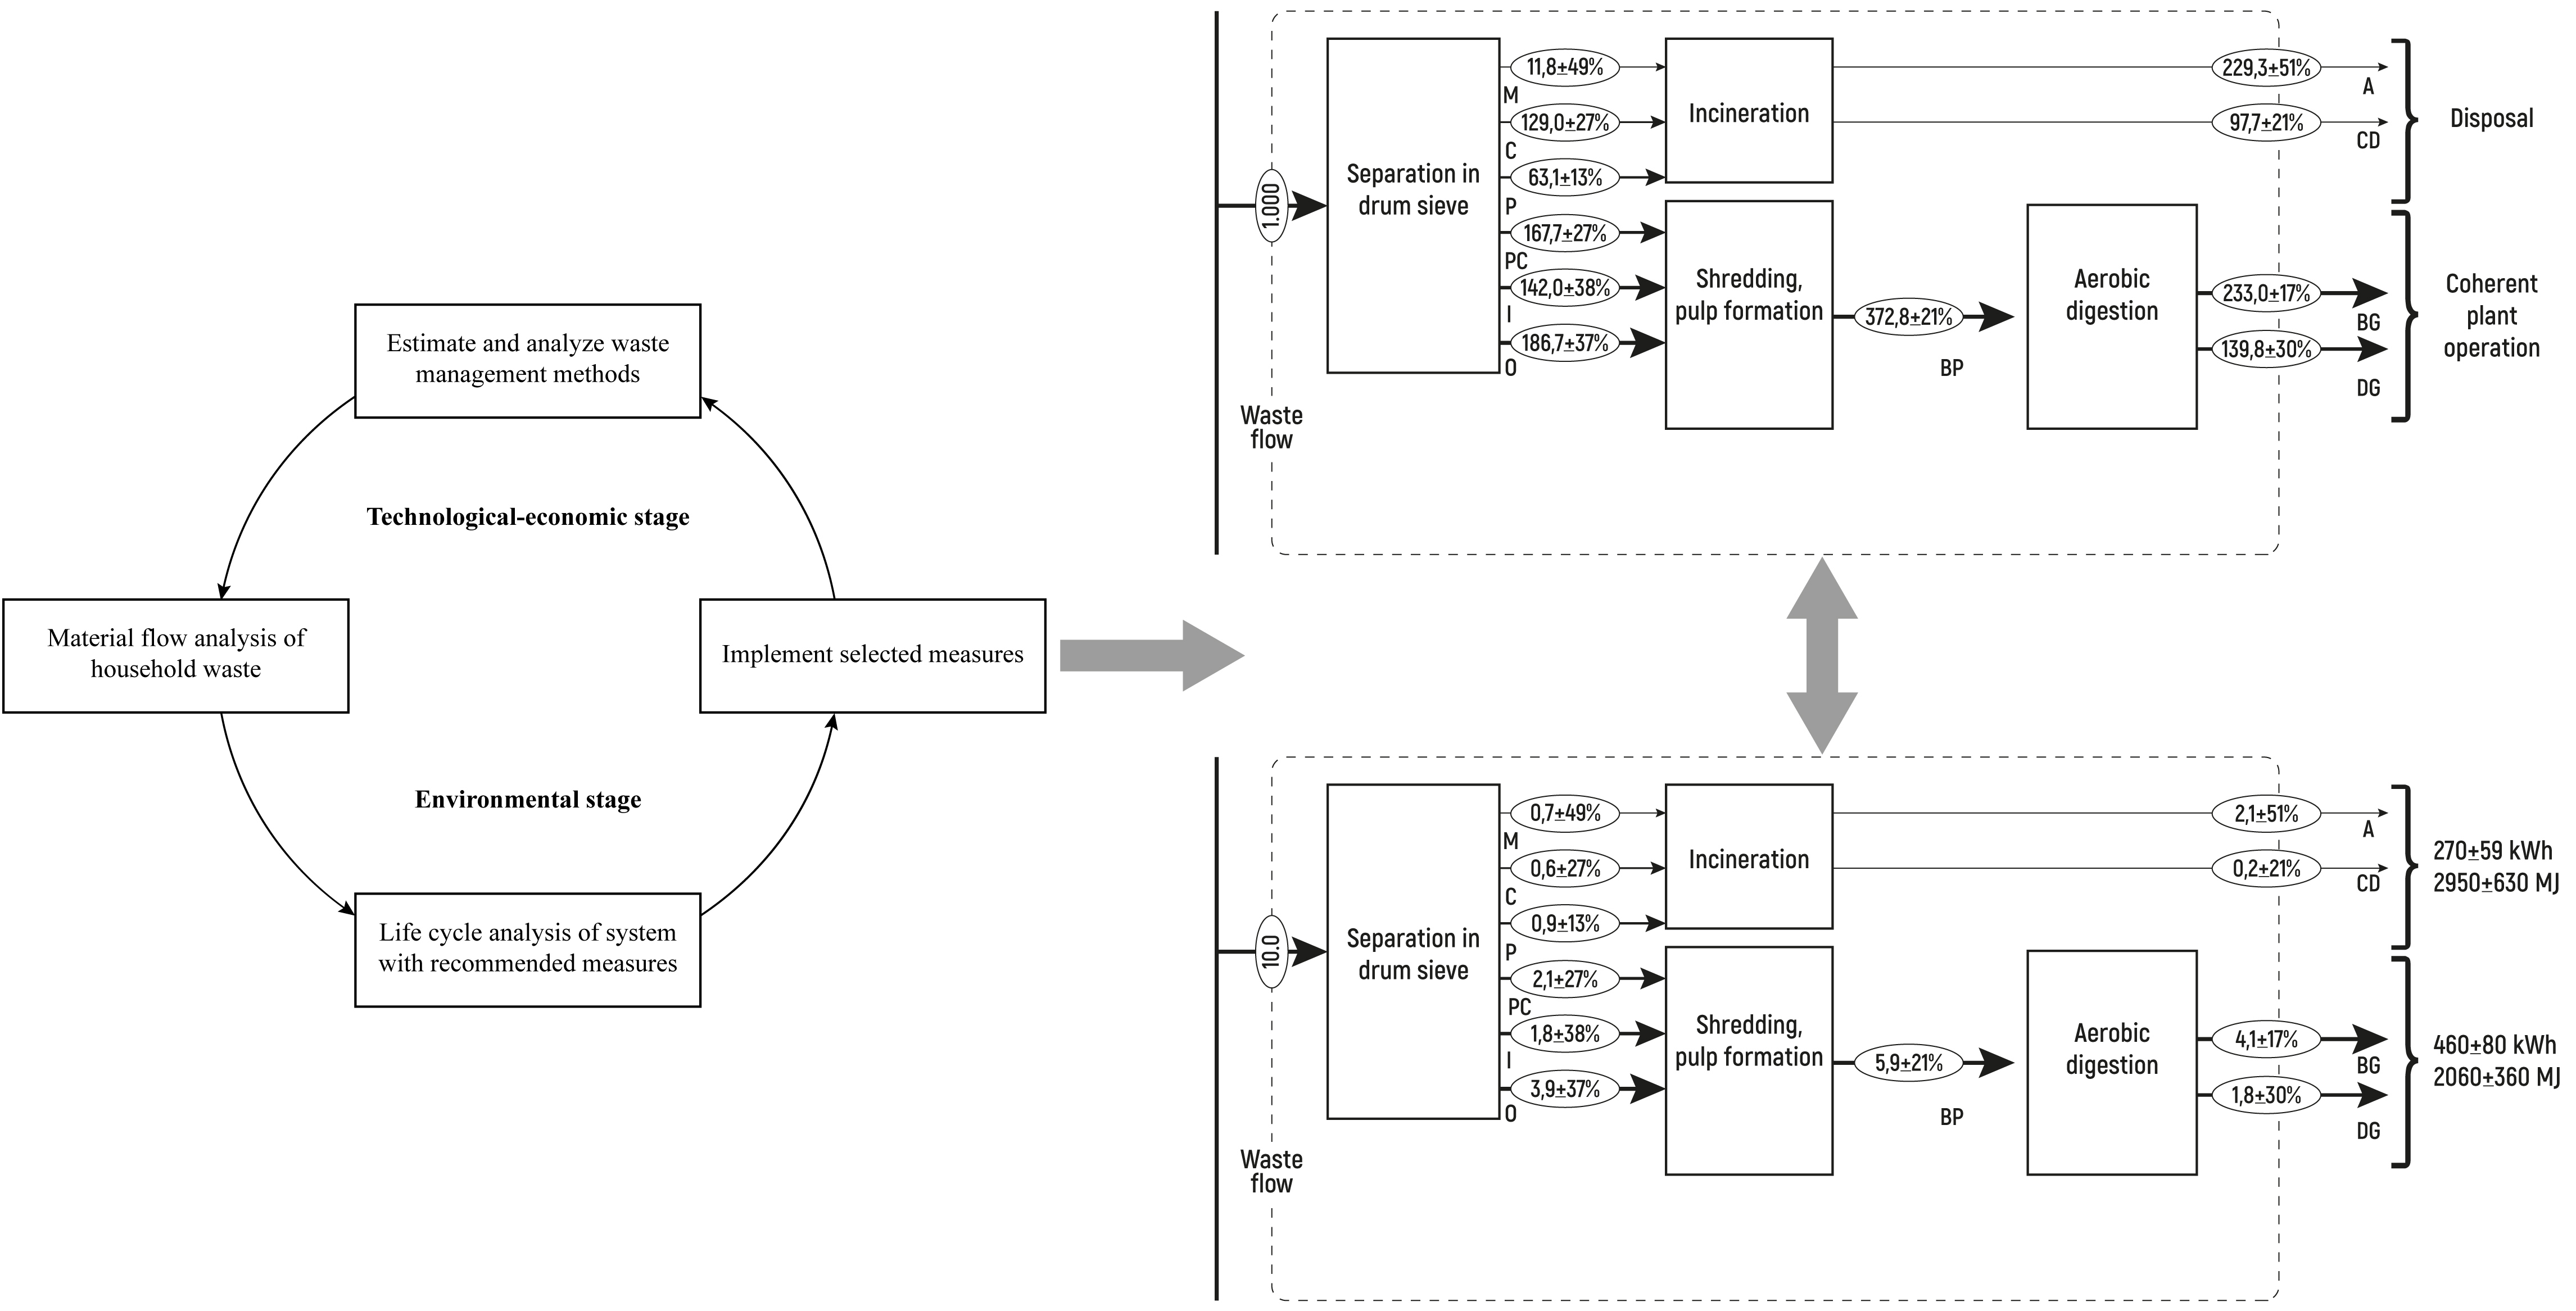 Integrated method for planning waste management based on the material flow analysis and life cycle assessment